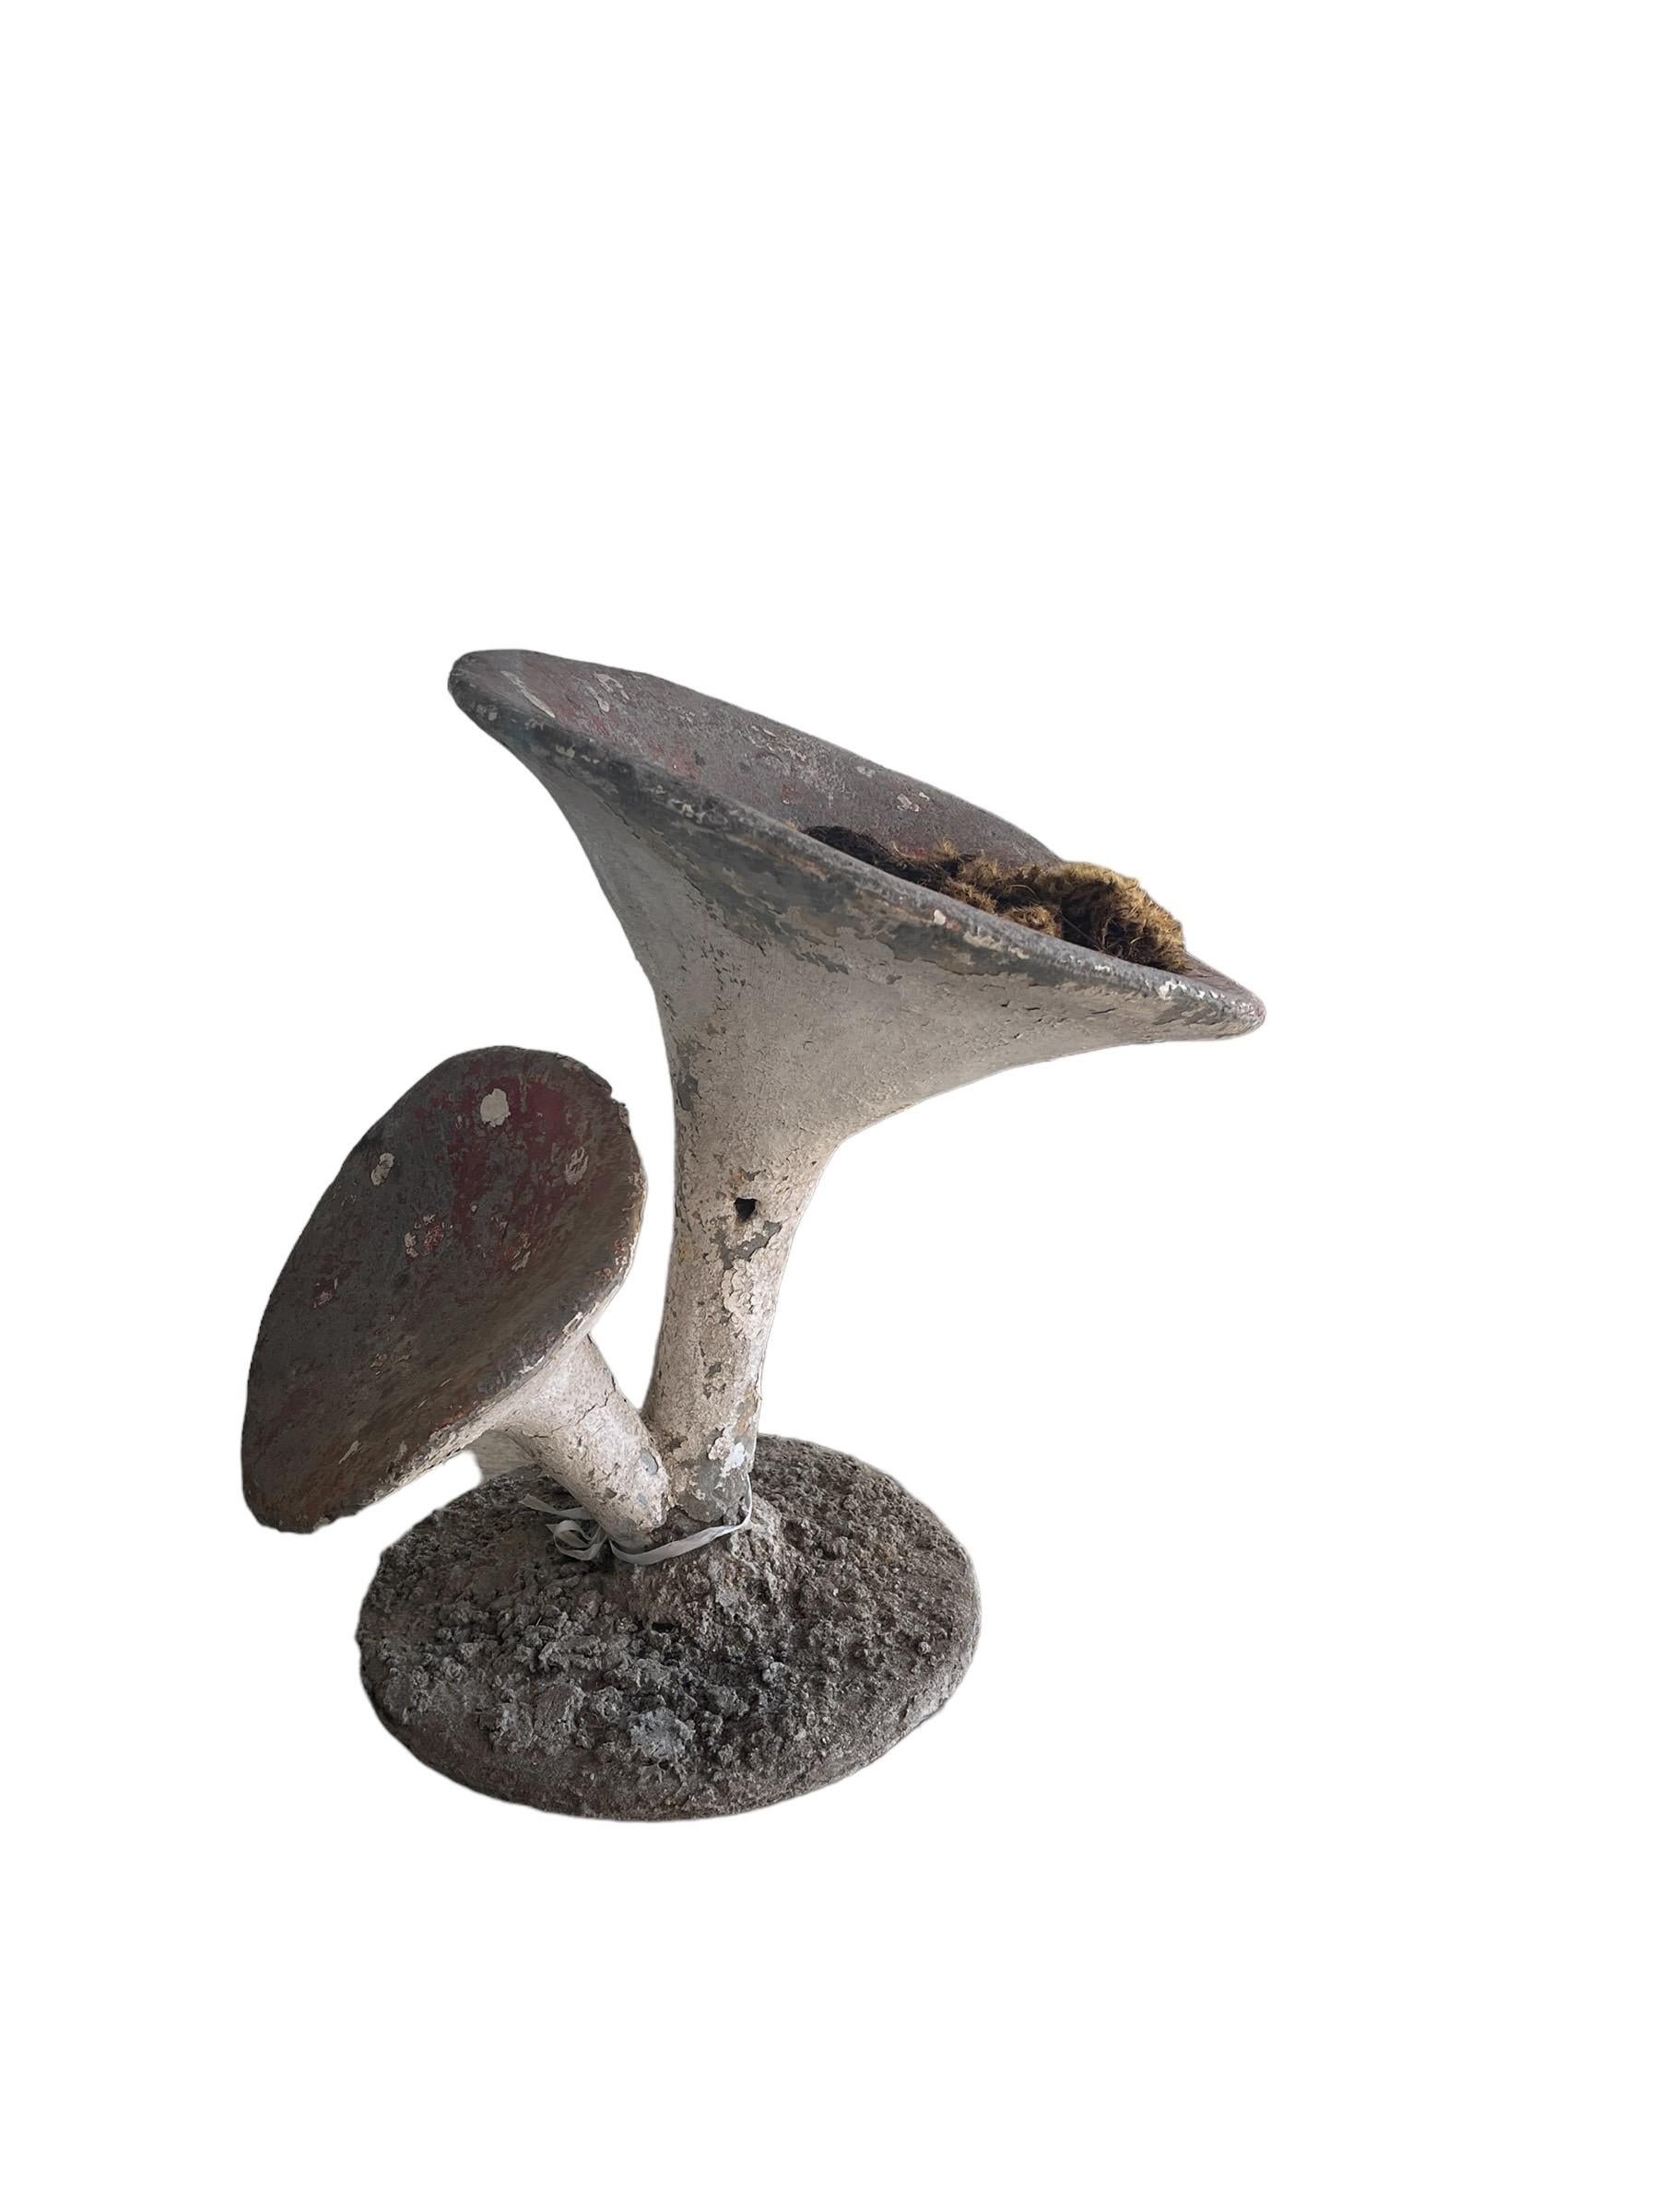 Transform your garden with these exquisite Antique Weathered French Cast Concrete Garden Mushrooms. Each mushroom bears the patina of time, adding rustic charm to your outdoor space. Crafted with old world charm, these durable concrete mushrooms